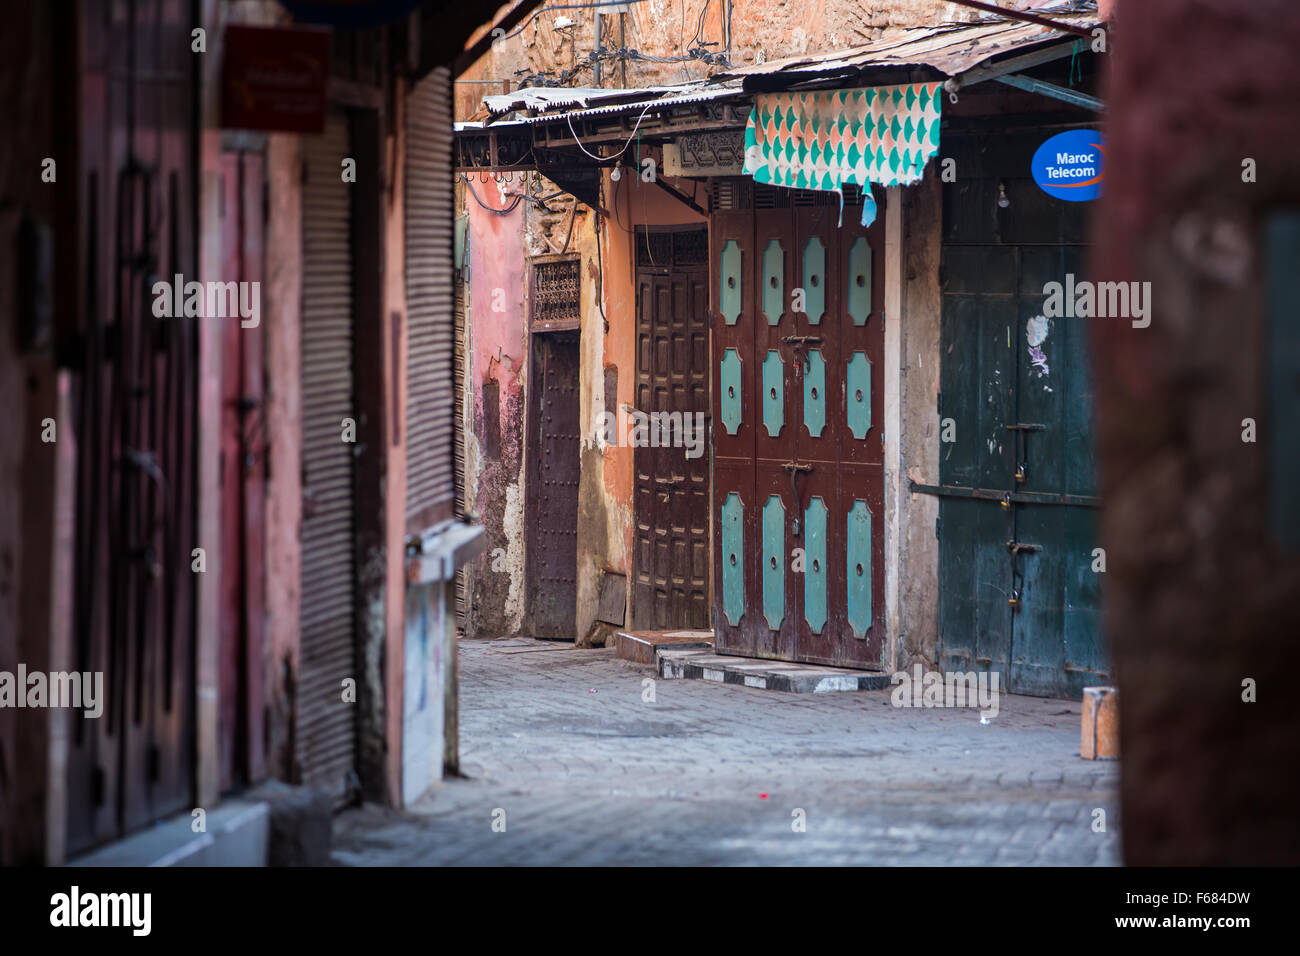 In the old streets of Marrakesh's Medina Stock Photo